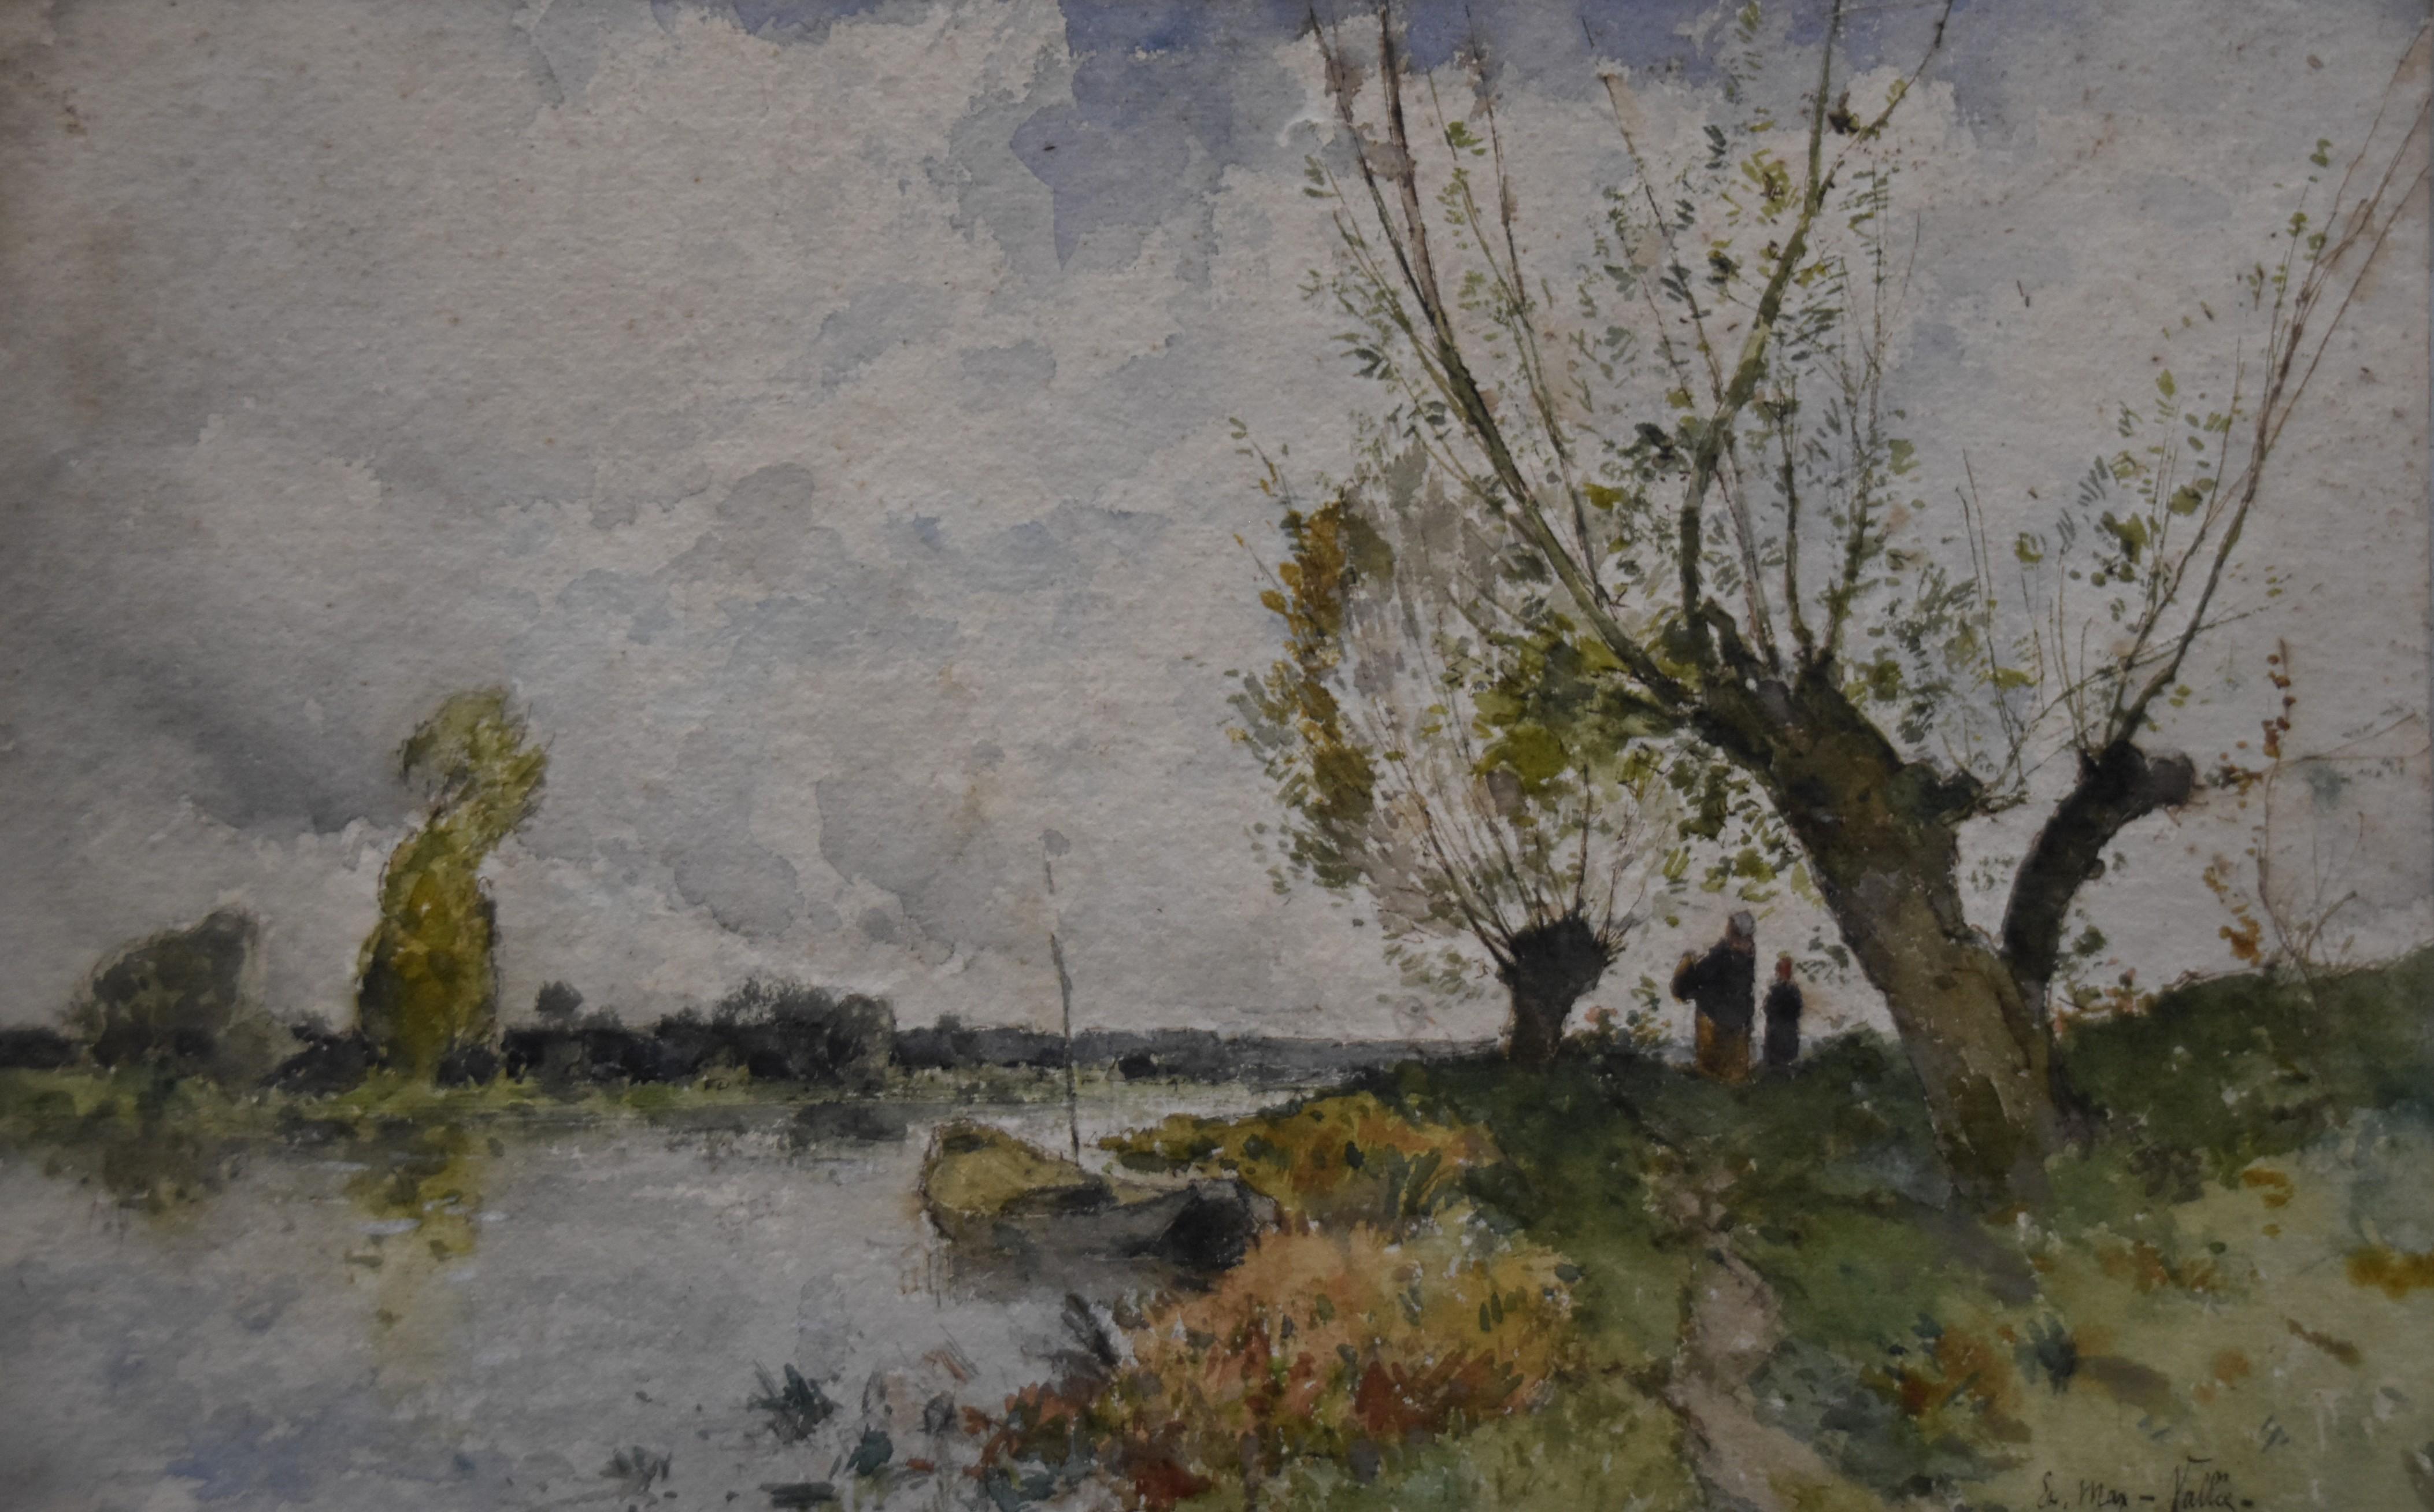 Etienne Maxime Vallée (1853-1881)  
Landscape at the river, 
signed lower right
watercolor on paper
19 x 31 cm
In a vintage frame, very damaged and a bit oversized on the left and right borders, see photographs please, 17 x 39,5 cm


This small